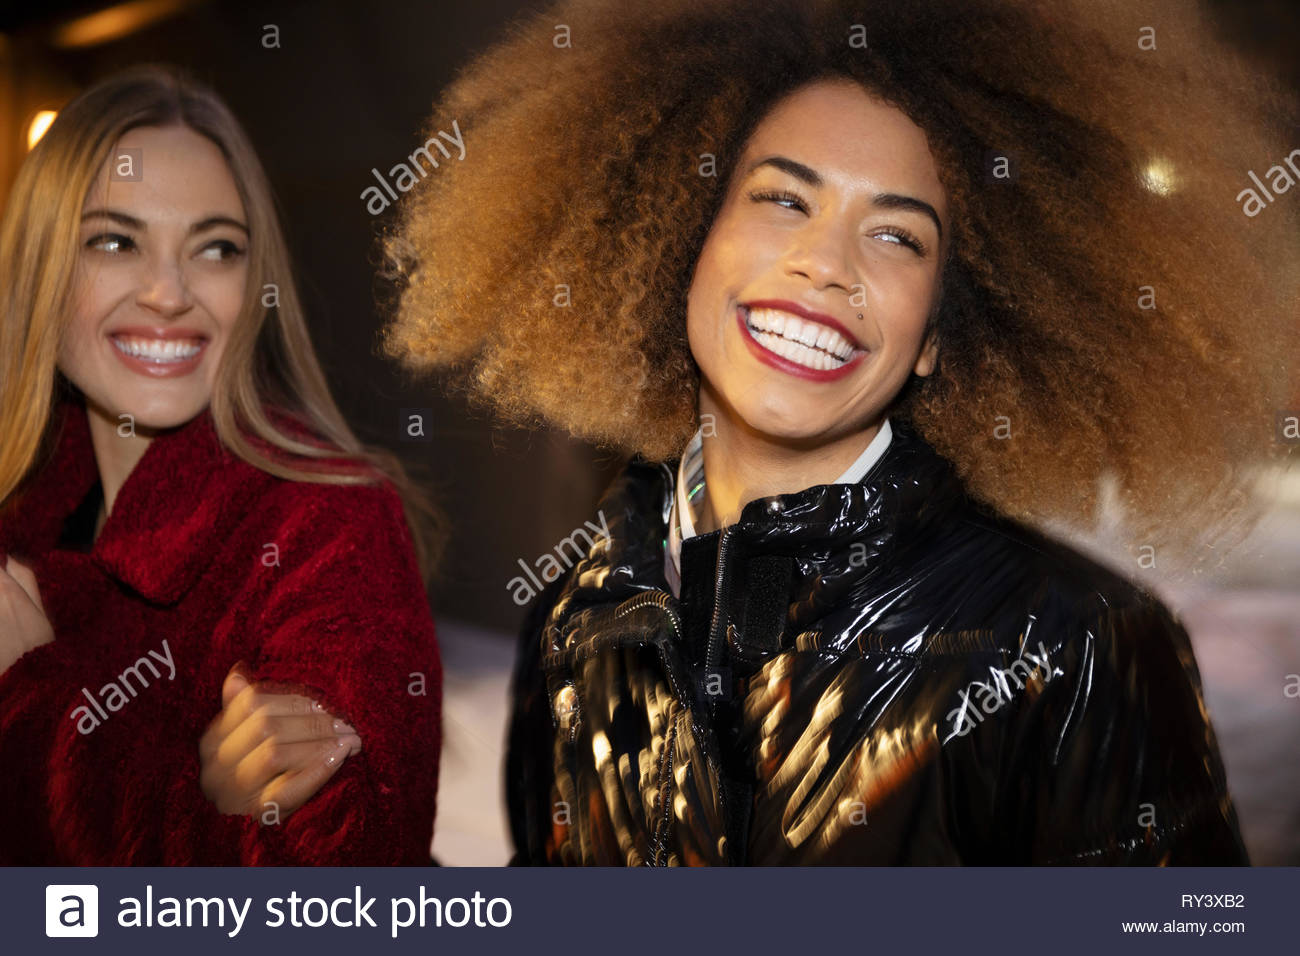 Portrait laughing, carefree young women Stock Photo